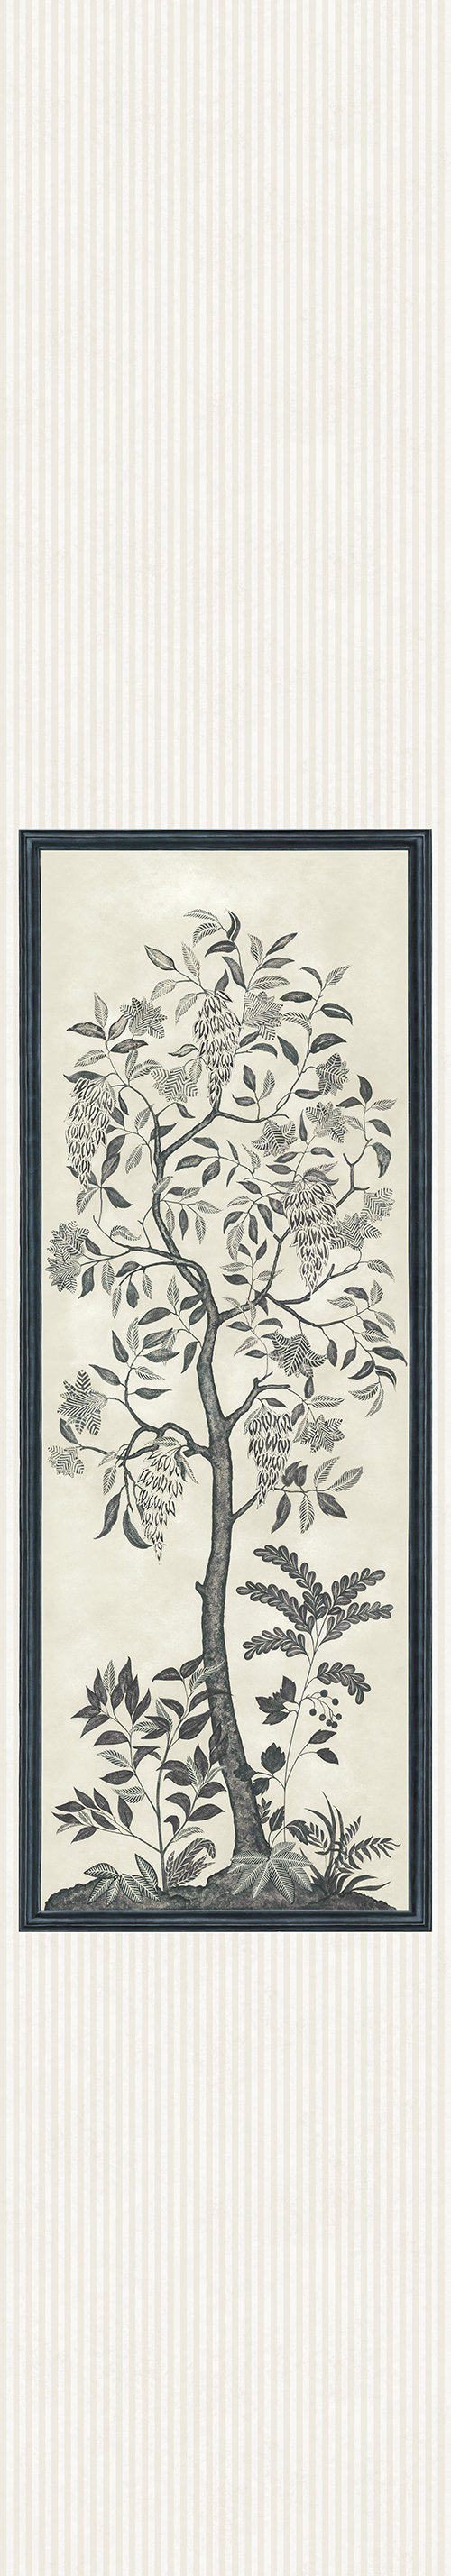 Trees of Eden Panel - Eternity Mural - Charcoal / Parchment - by Cole & Son